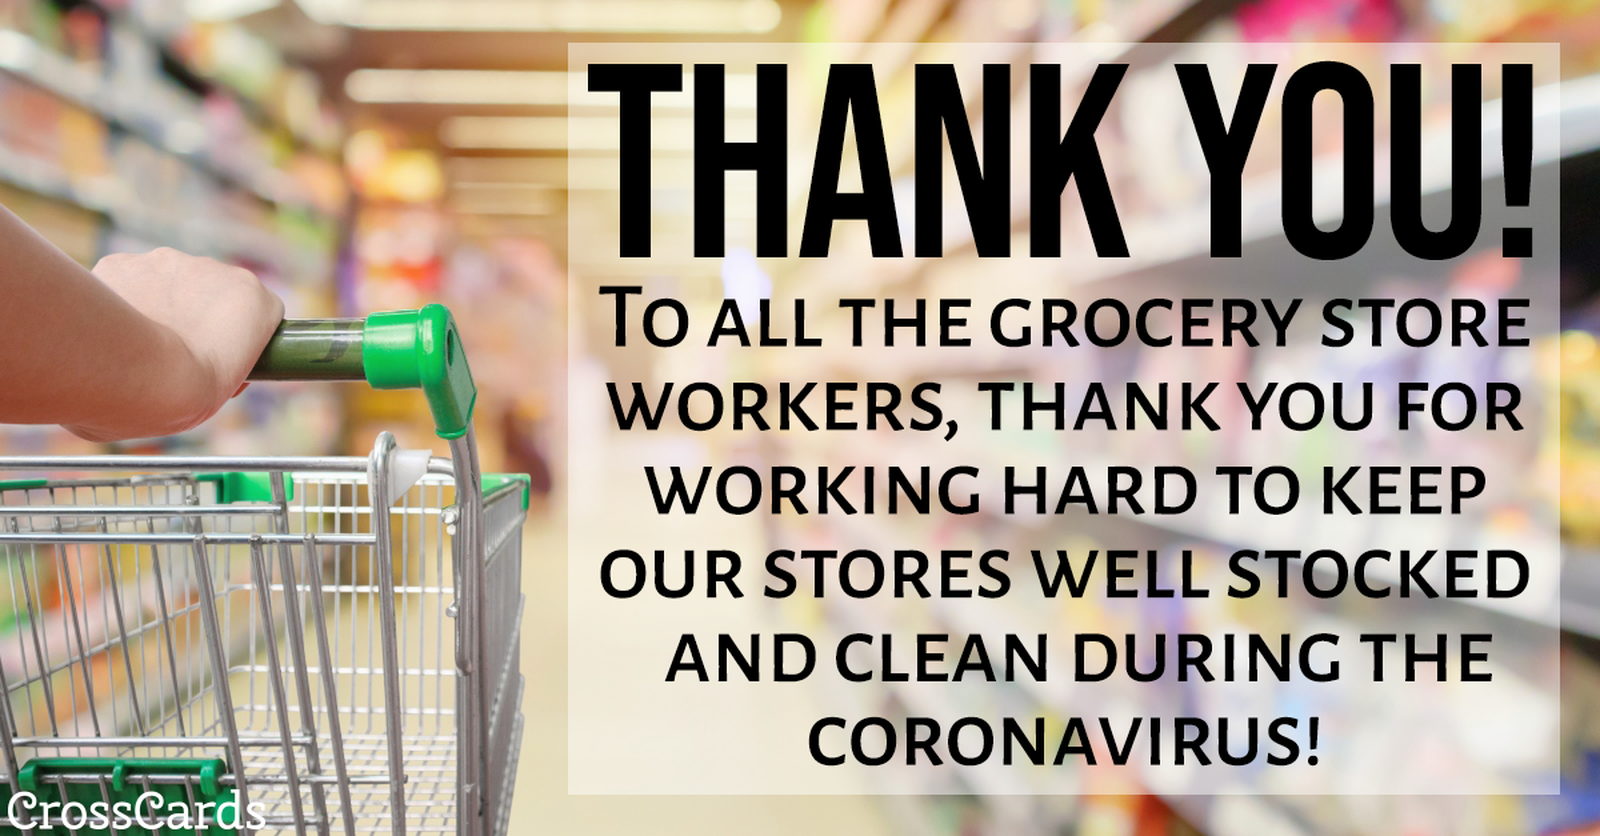 Thank You Grocery Store Workers! ecard, online card